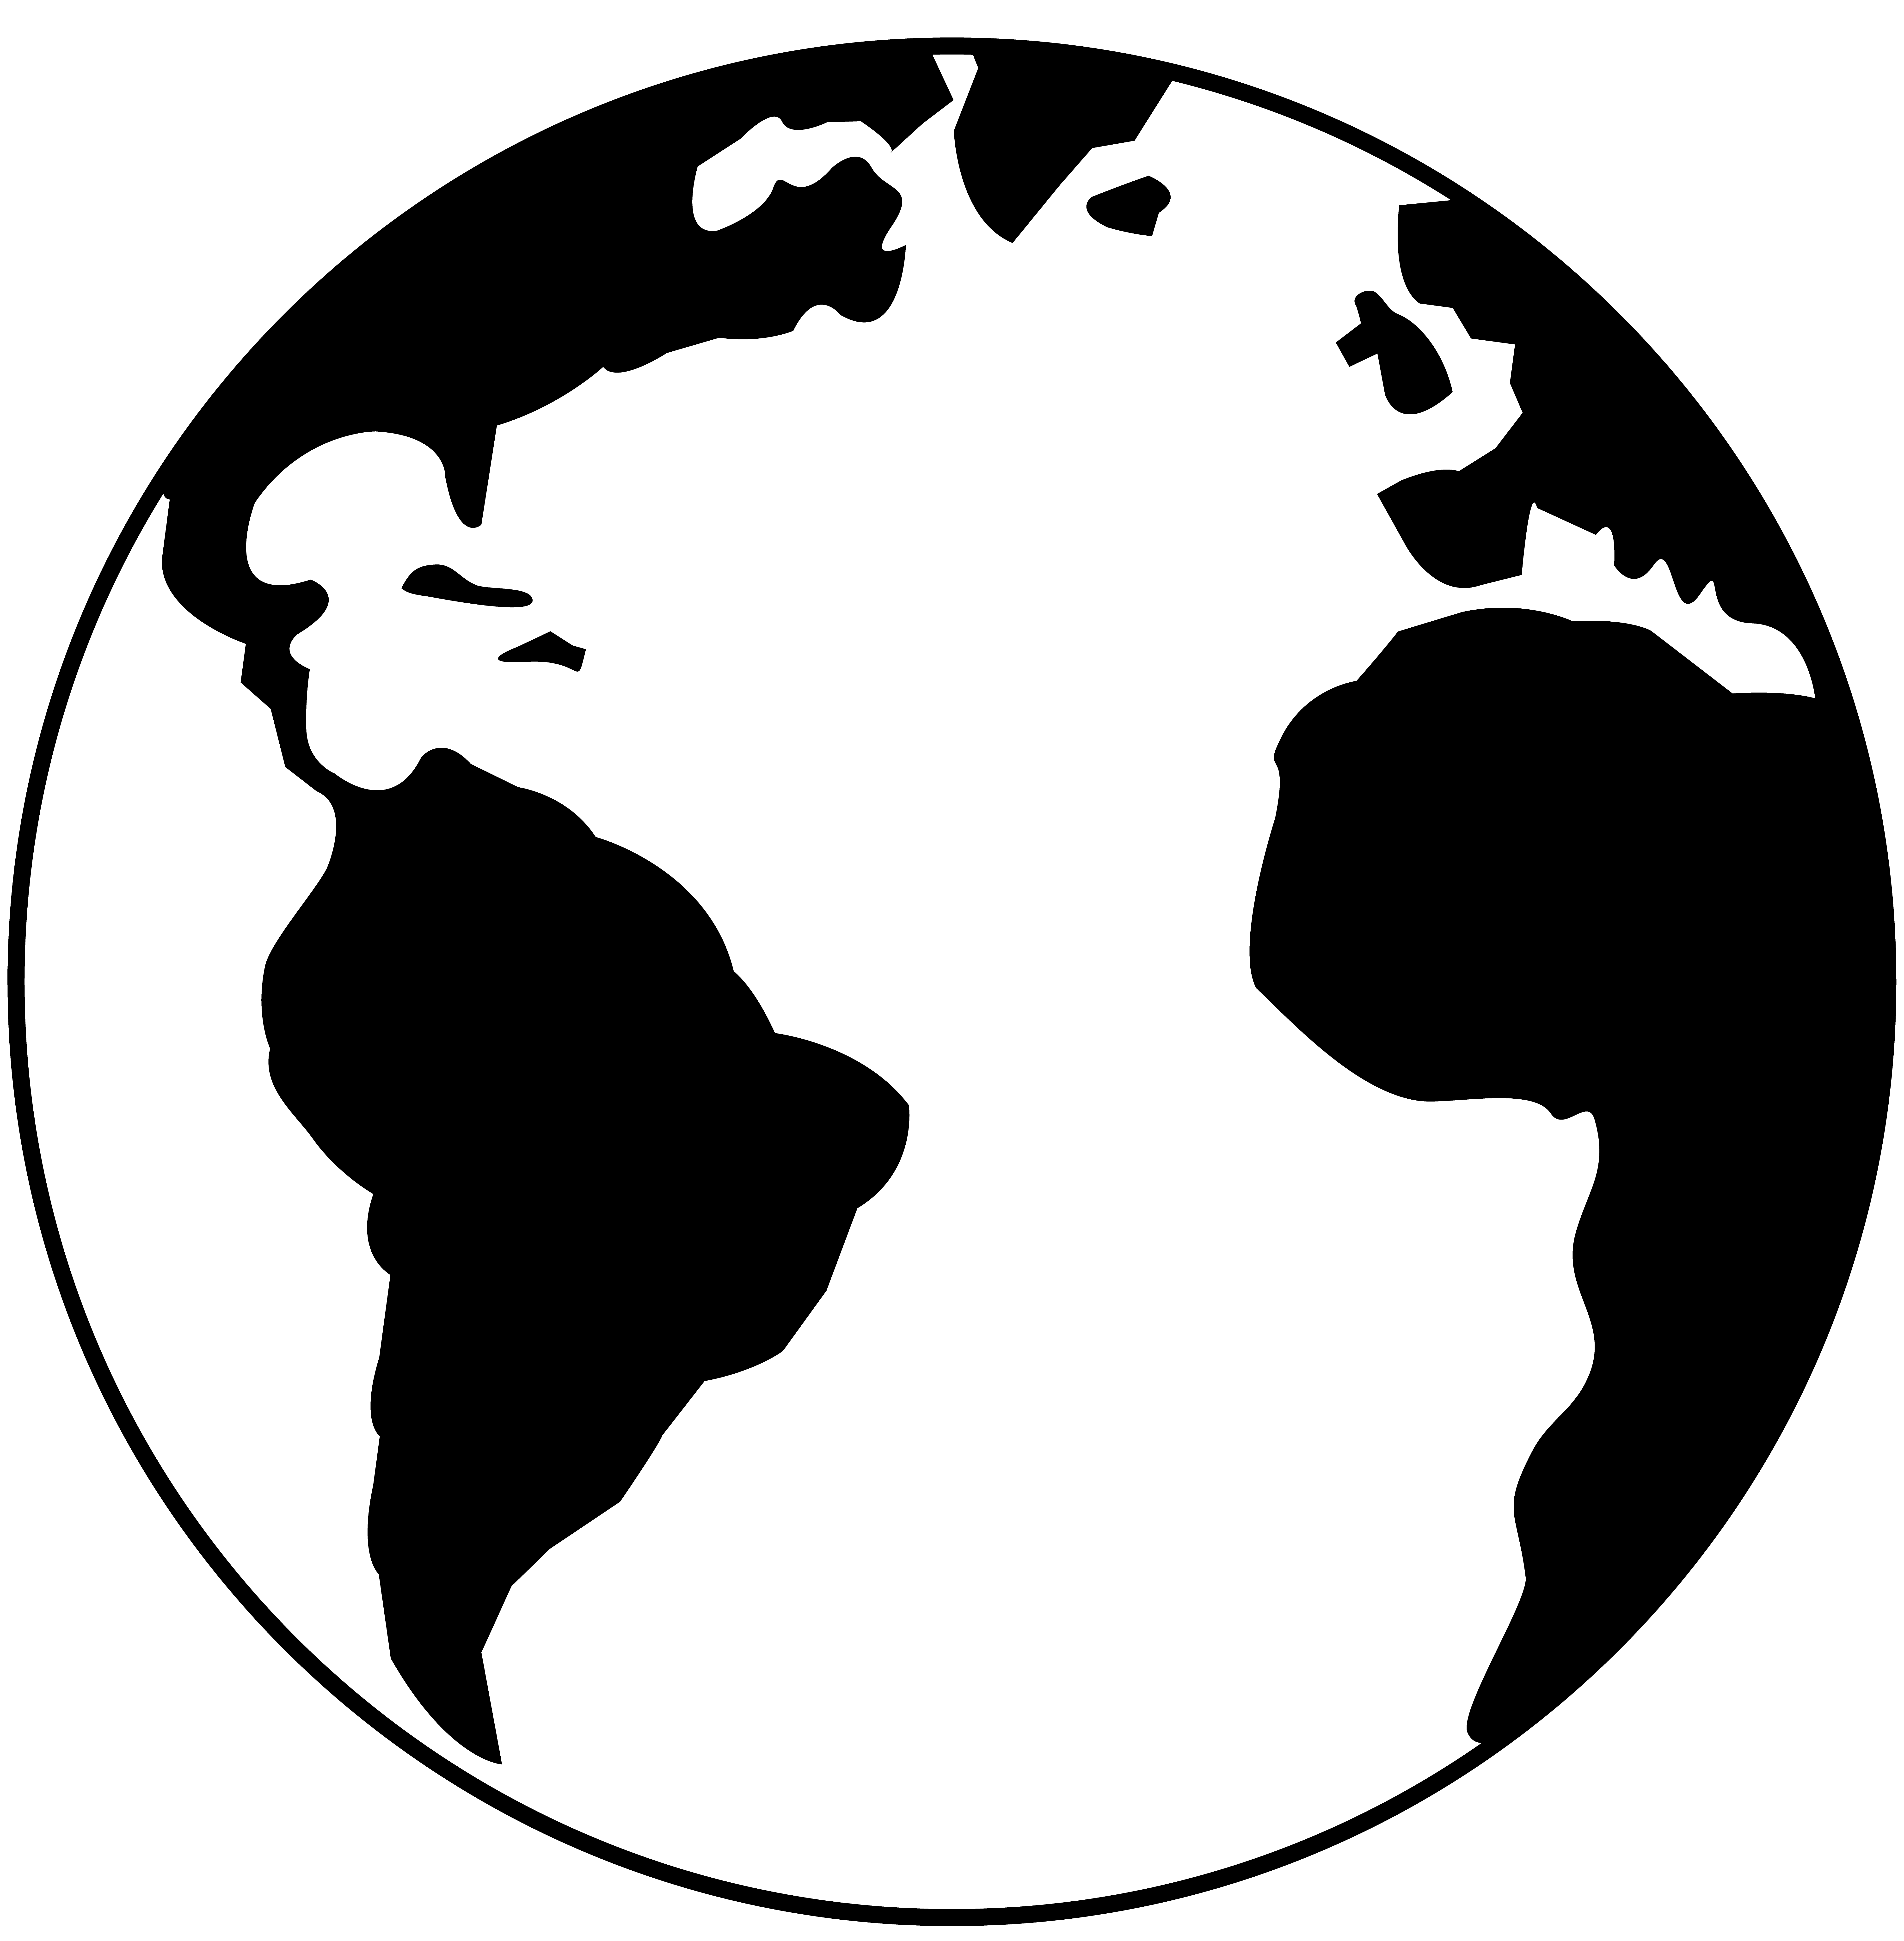 Earth Clipart Black And White.